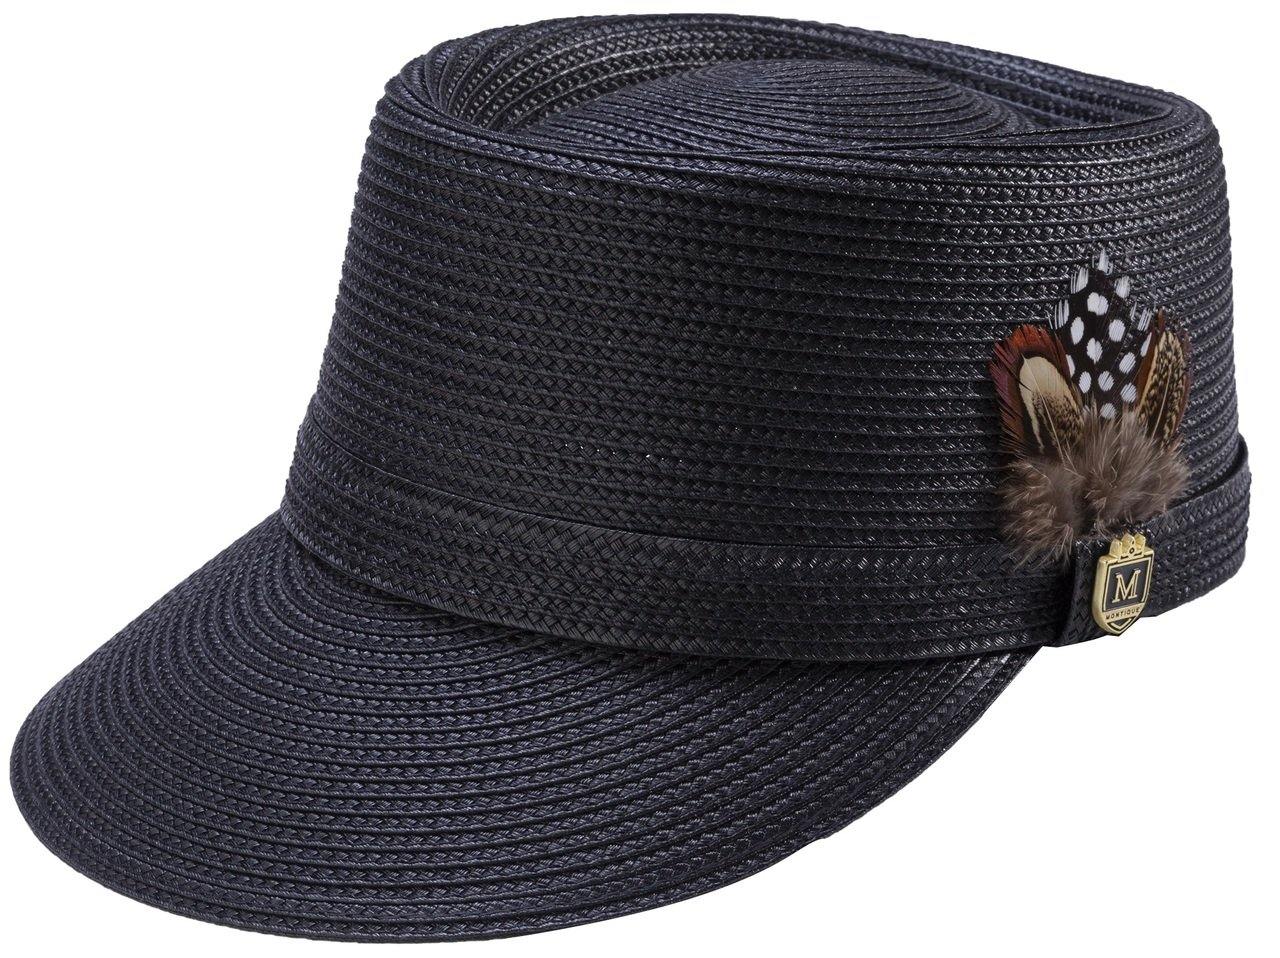 Men's Braided Solid Color Legionnaire Hat in Black H-66 - Suits & More